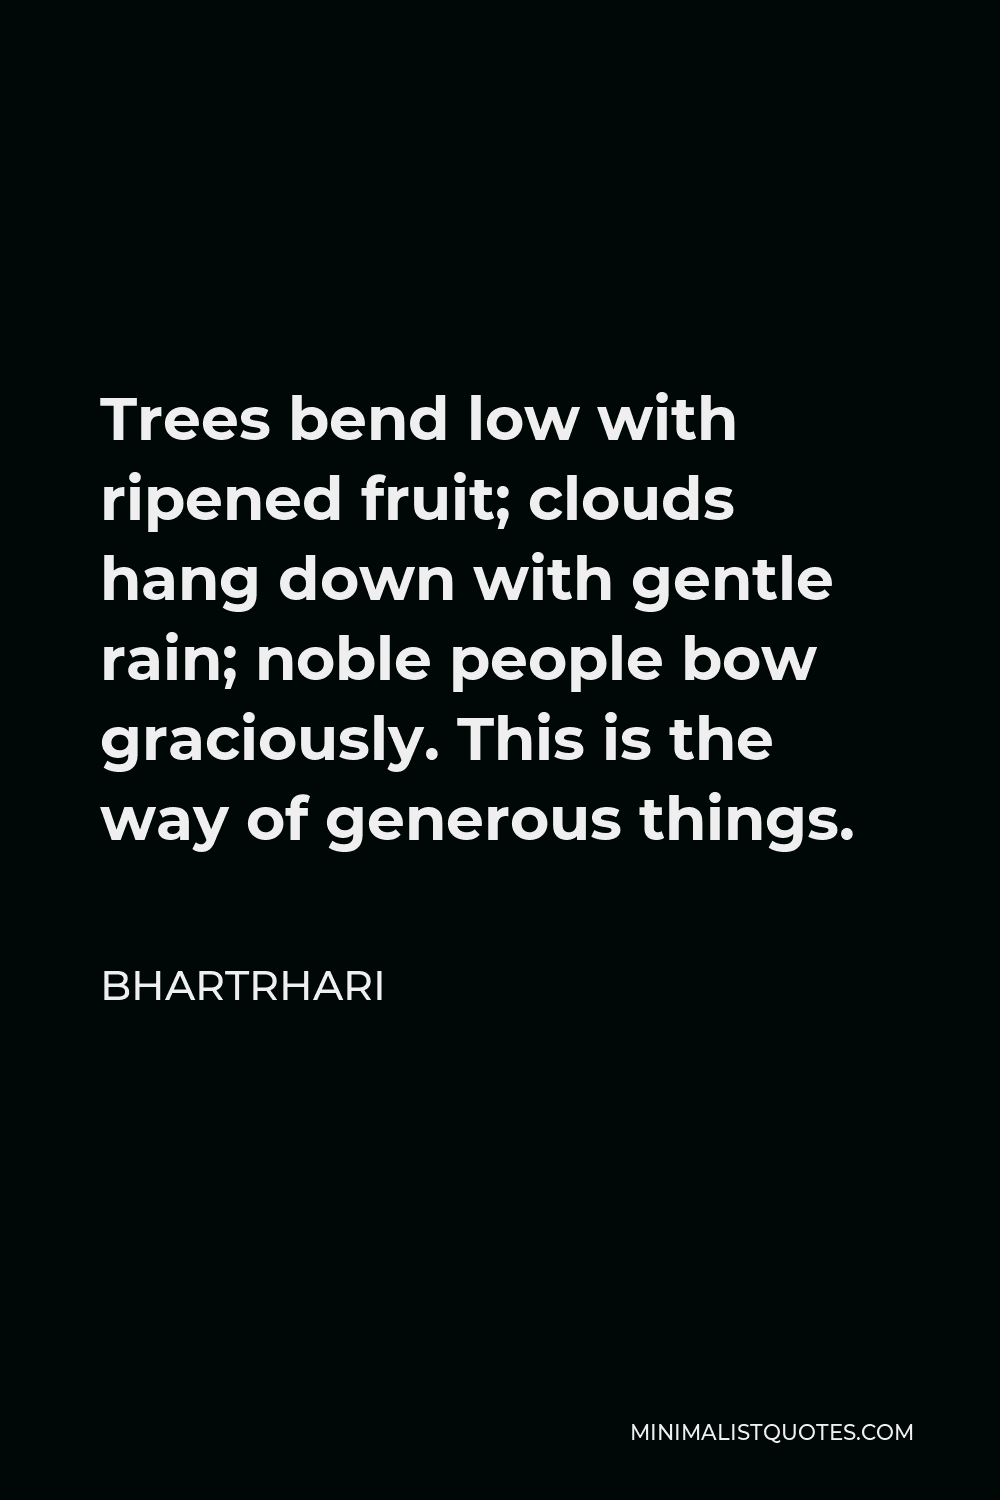 Bhartrhari Quote - Trees bend low with ripened fruit; clouds hang down with gentle rain; noble people bow graciously. This is the way of generous things.